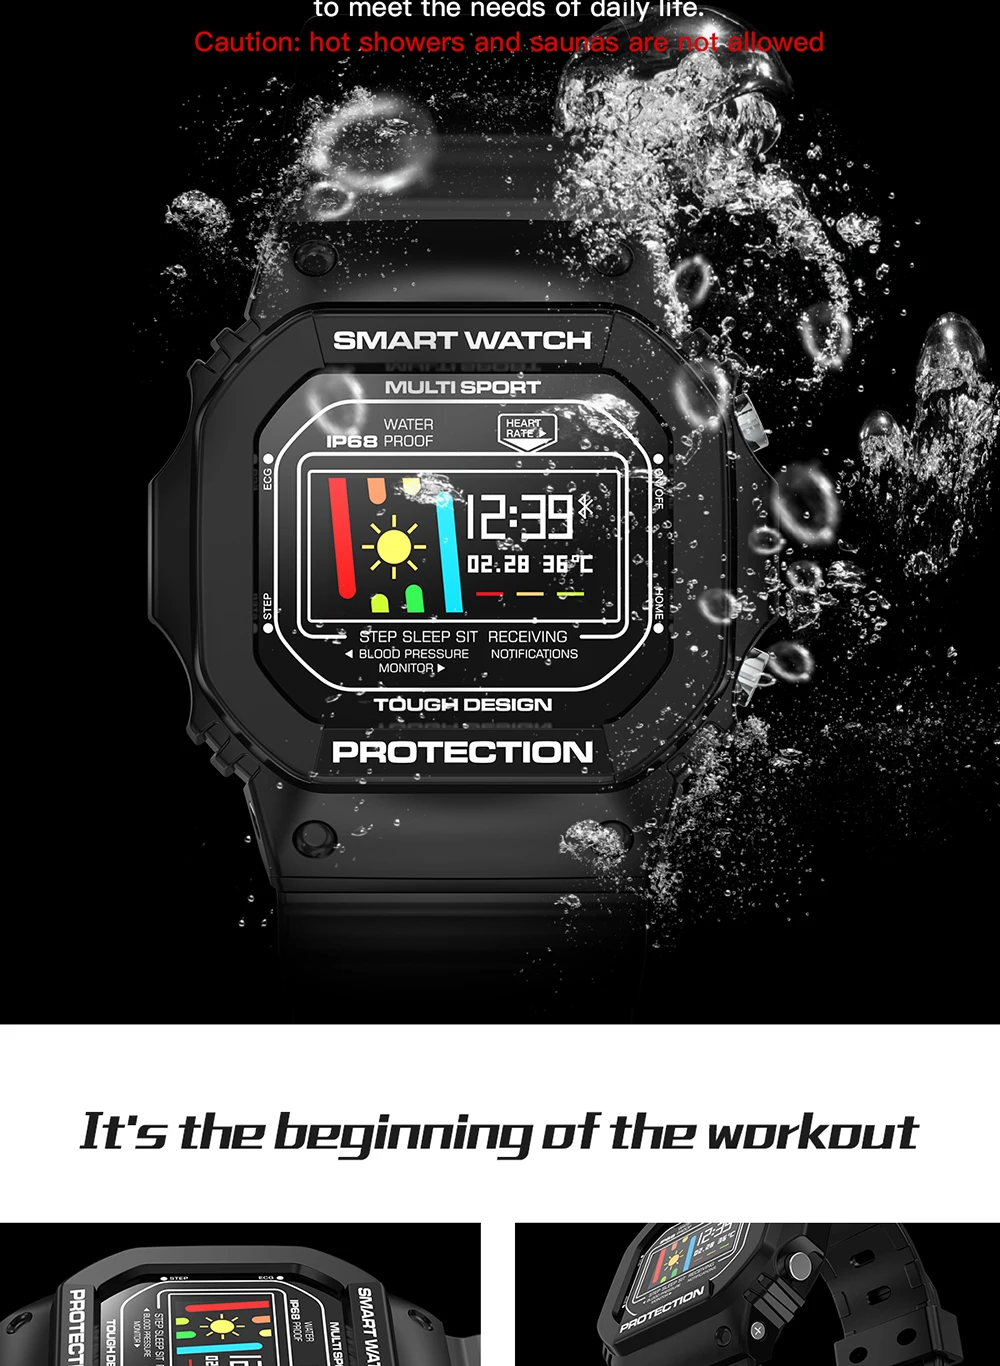 Imosi X12 Smart Watch for Men Women With Blood Pressure Heart Rate Monitor IP68 Waterproof Smartwatch compatible Android IOS